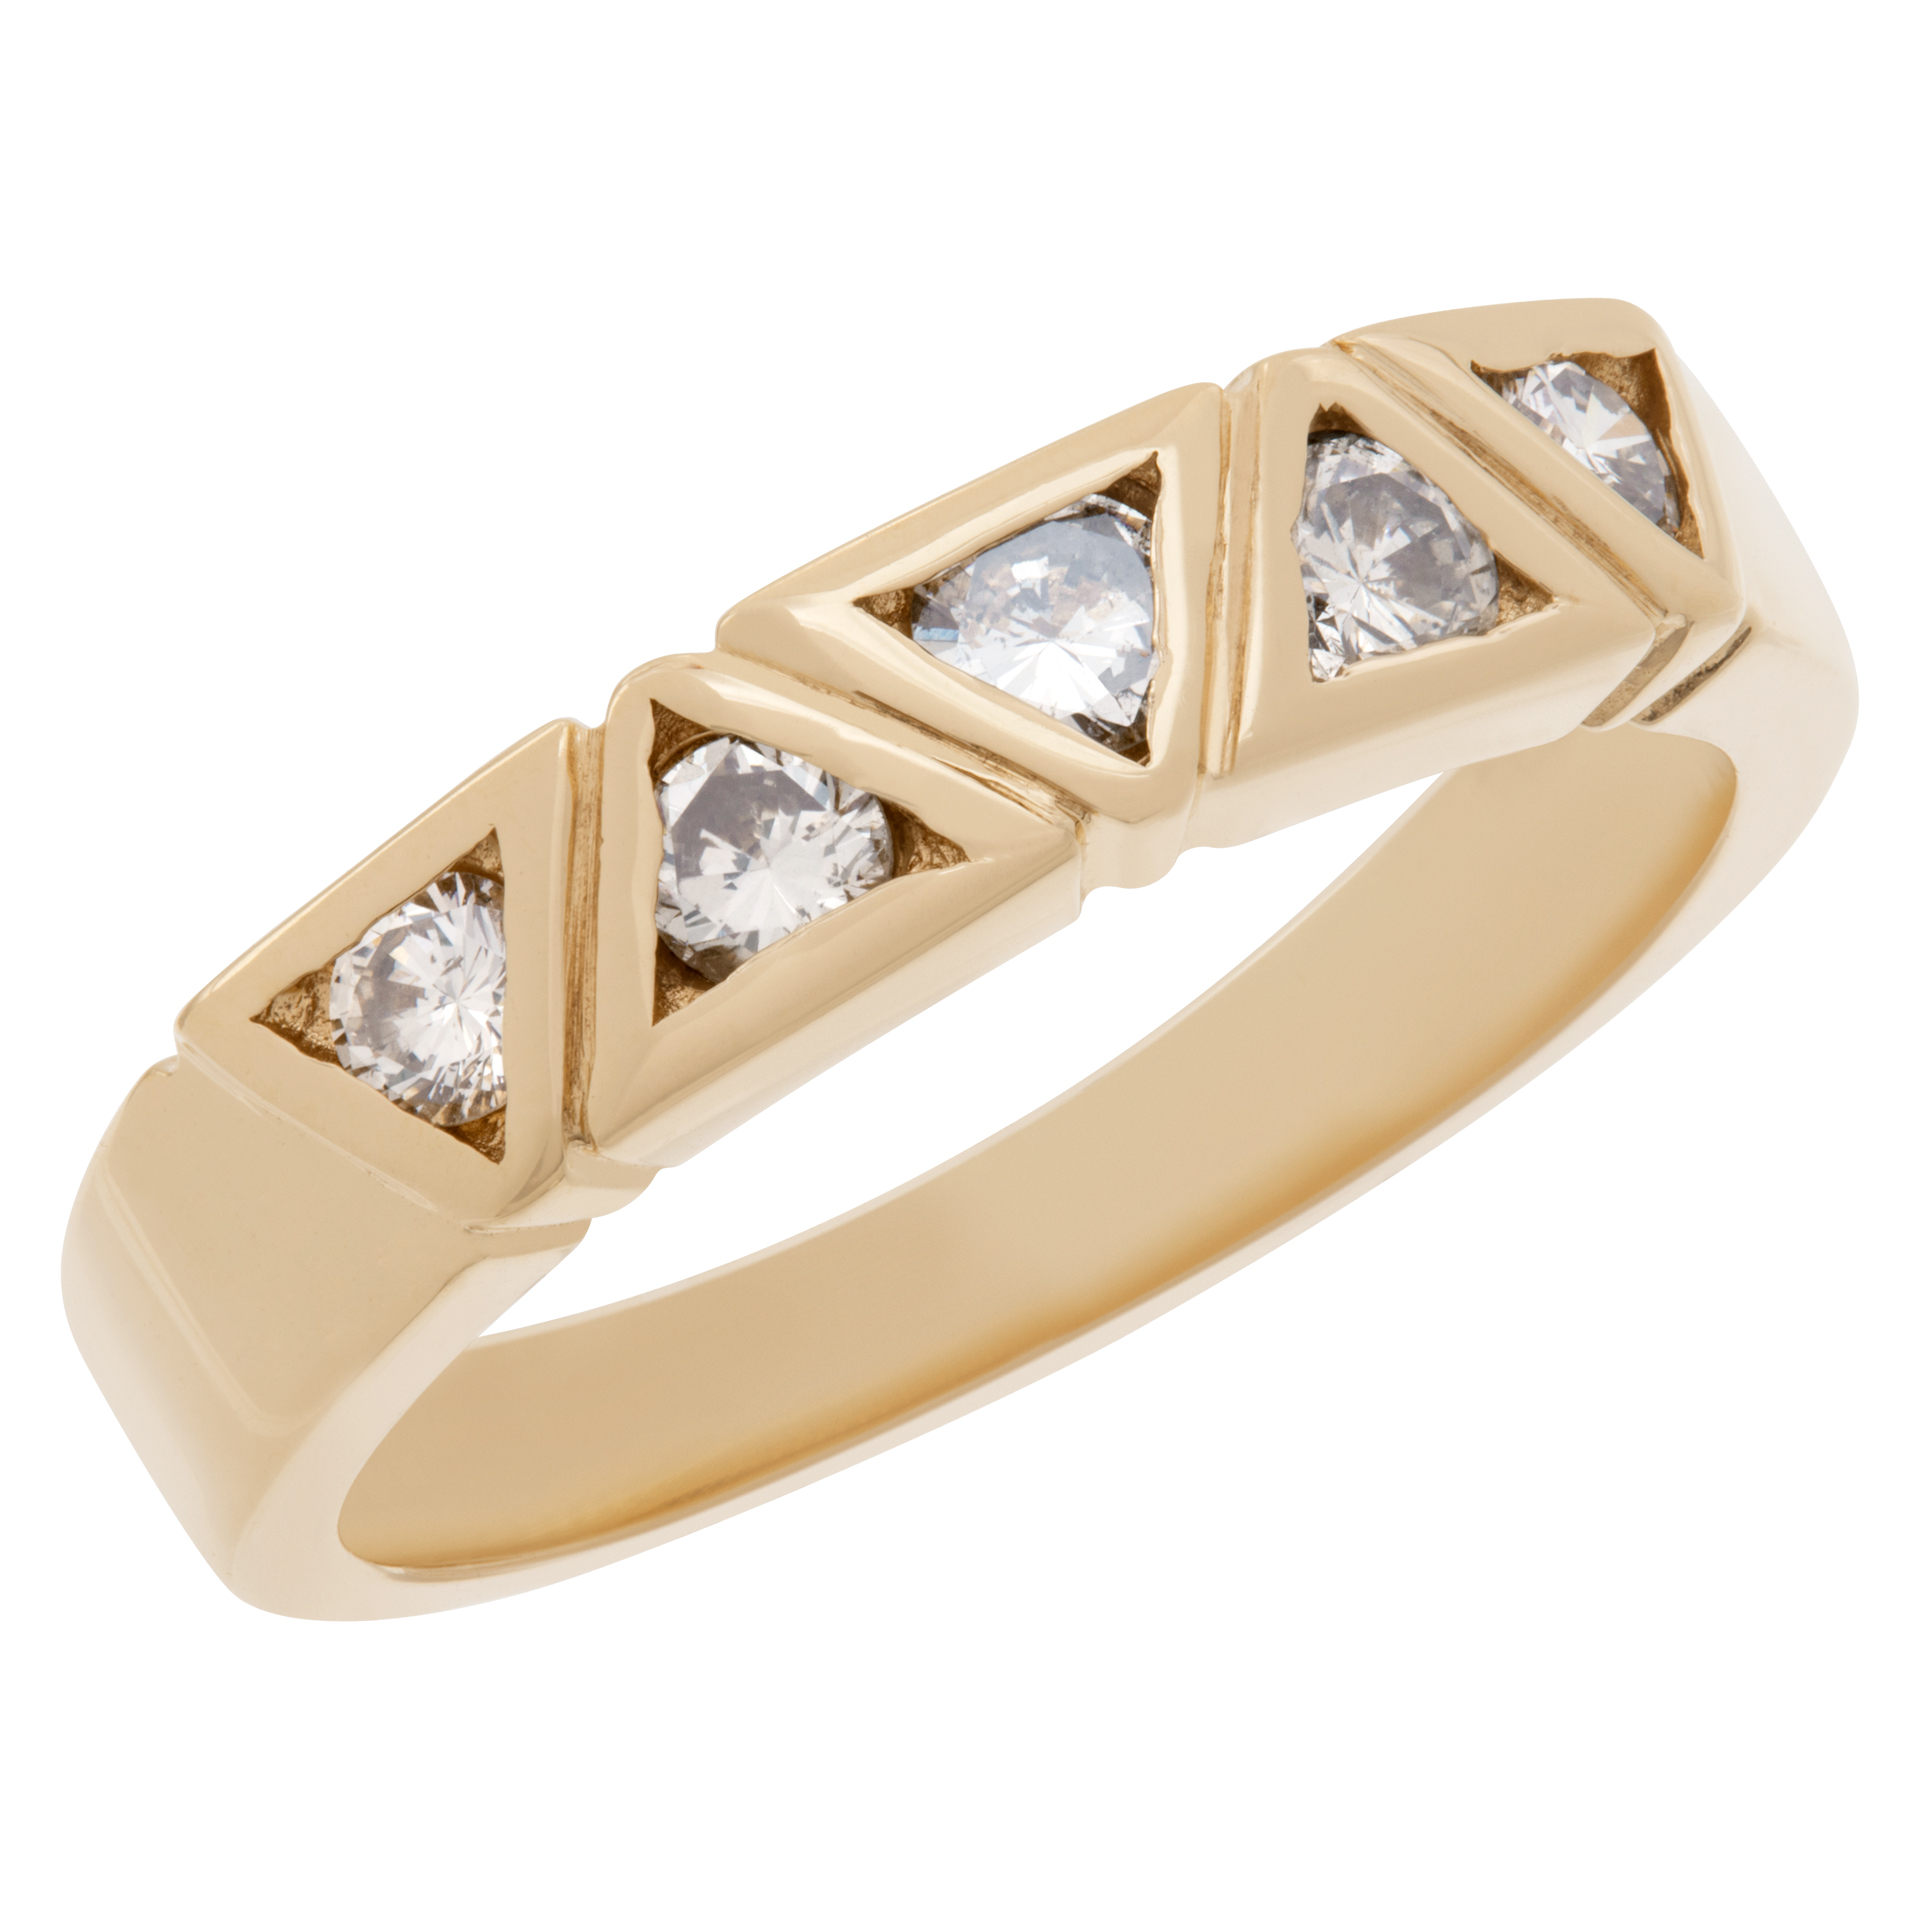 Ring Of Diamond Triangles. 0.50 Carats Set In 14k yellow Gold. Size 7.5 image 3